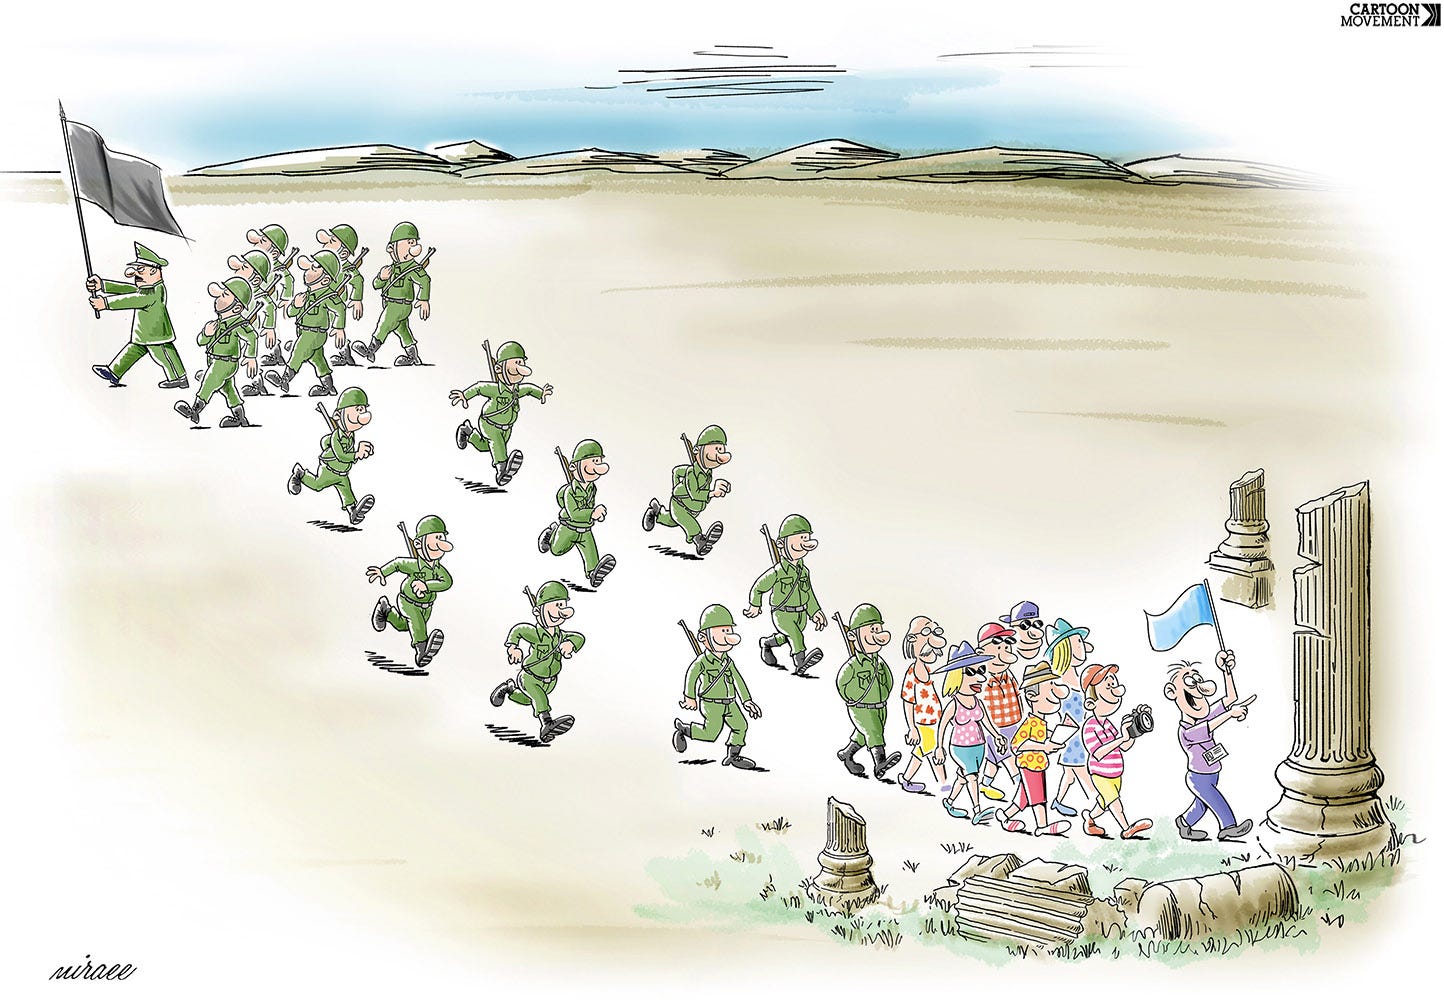 Cartoon showing soldiers following a general carrying a black flag. At the back of the group of soldiers, some of them are turning and walking away, deciding to follow a tour guide with a blue flag, who is guiding a group of tourists through the ruins of an ancient temple, instead.